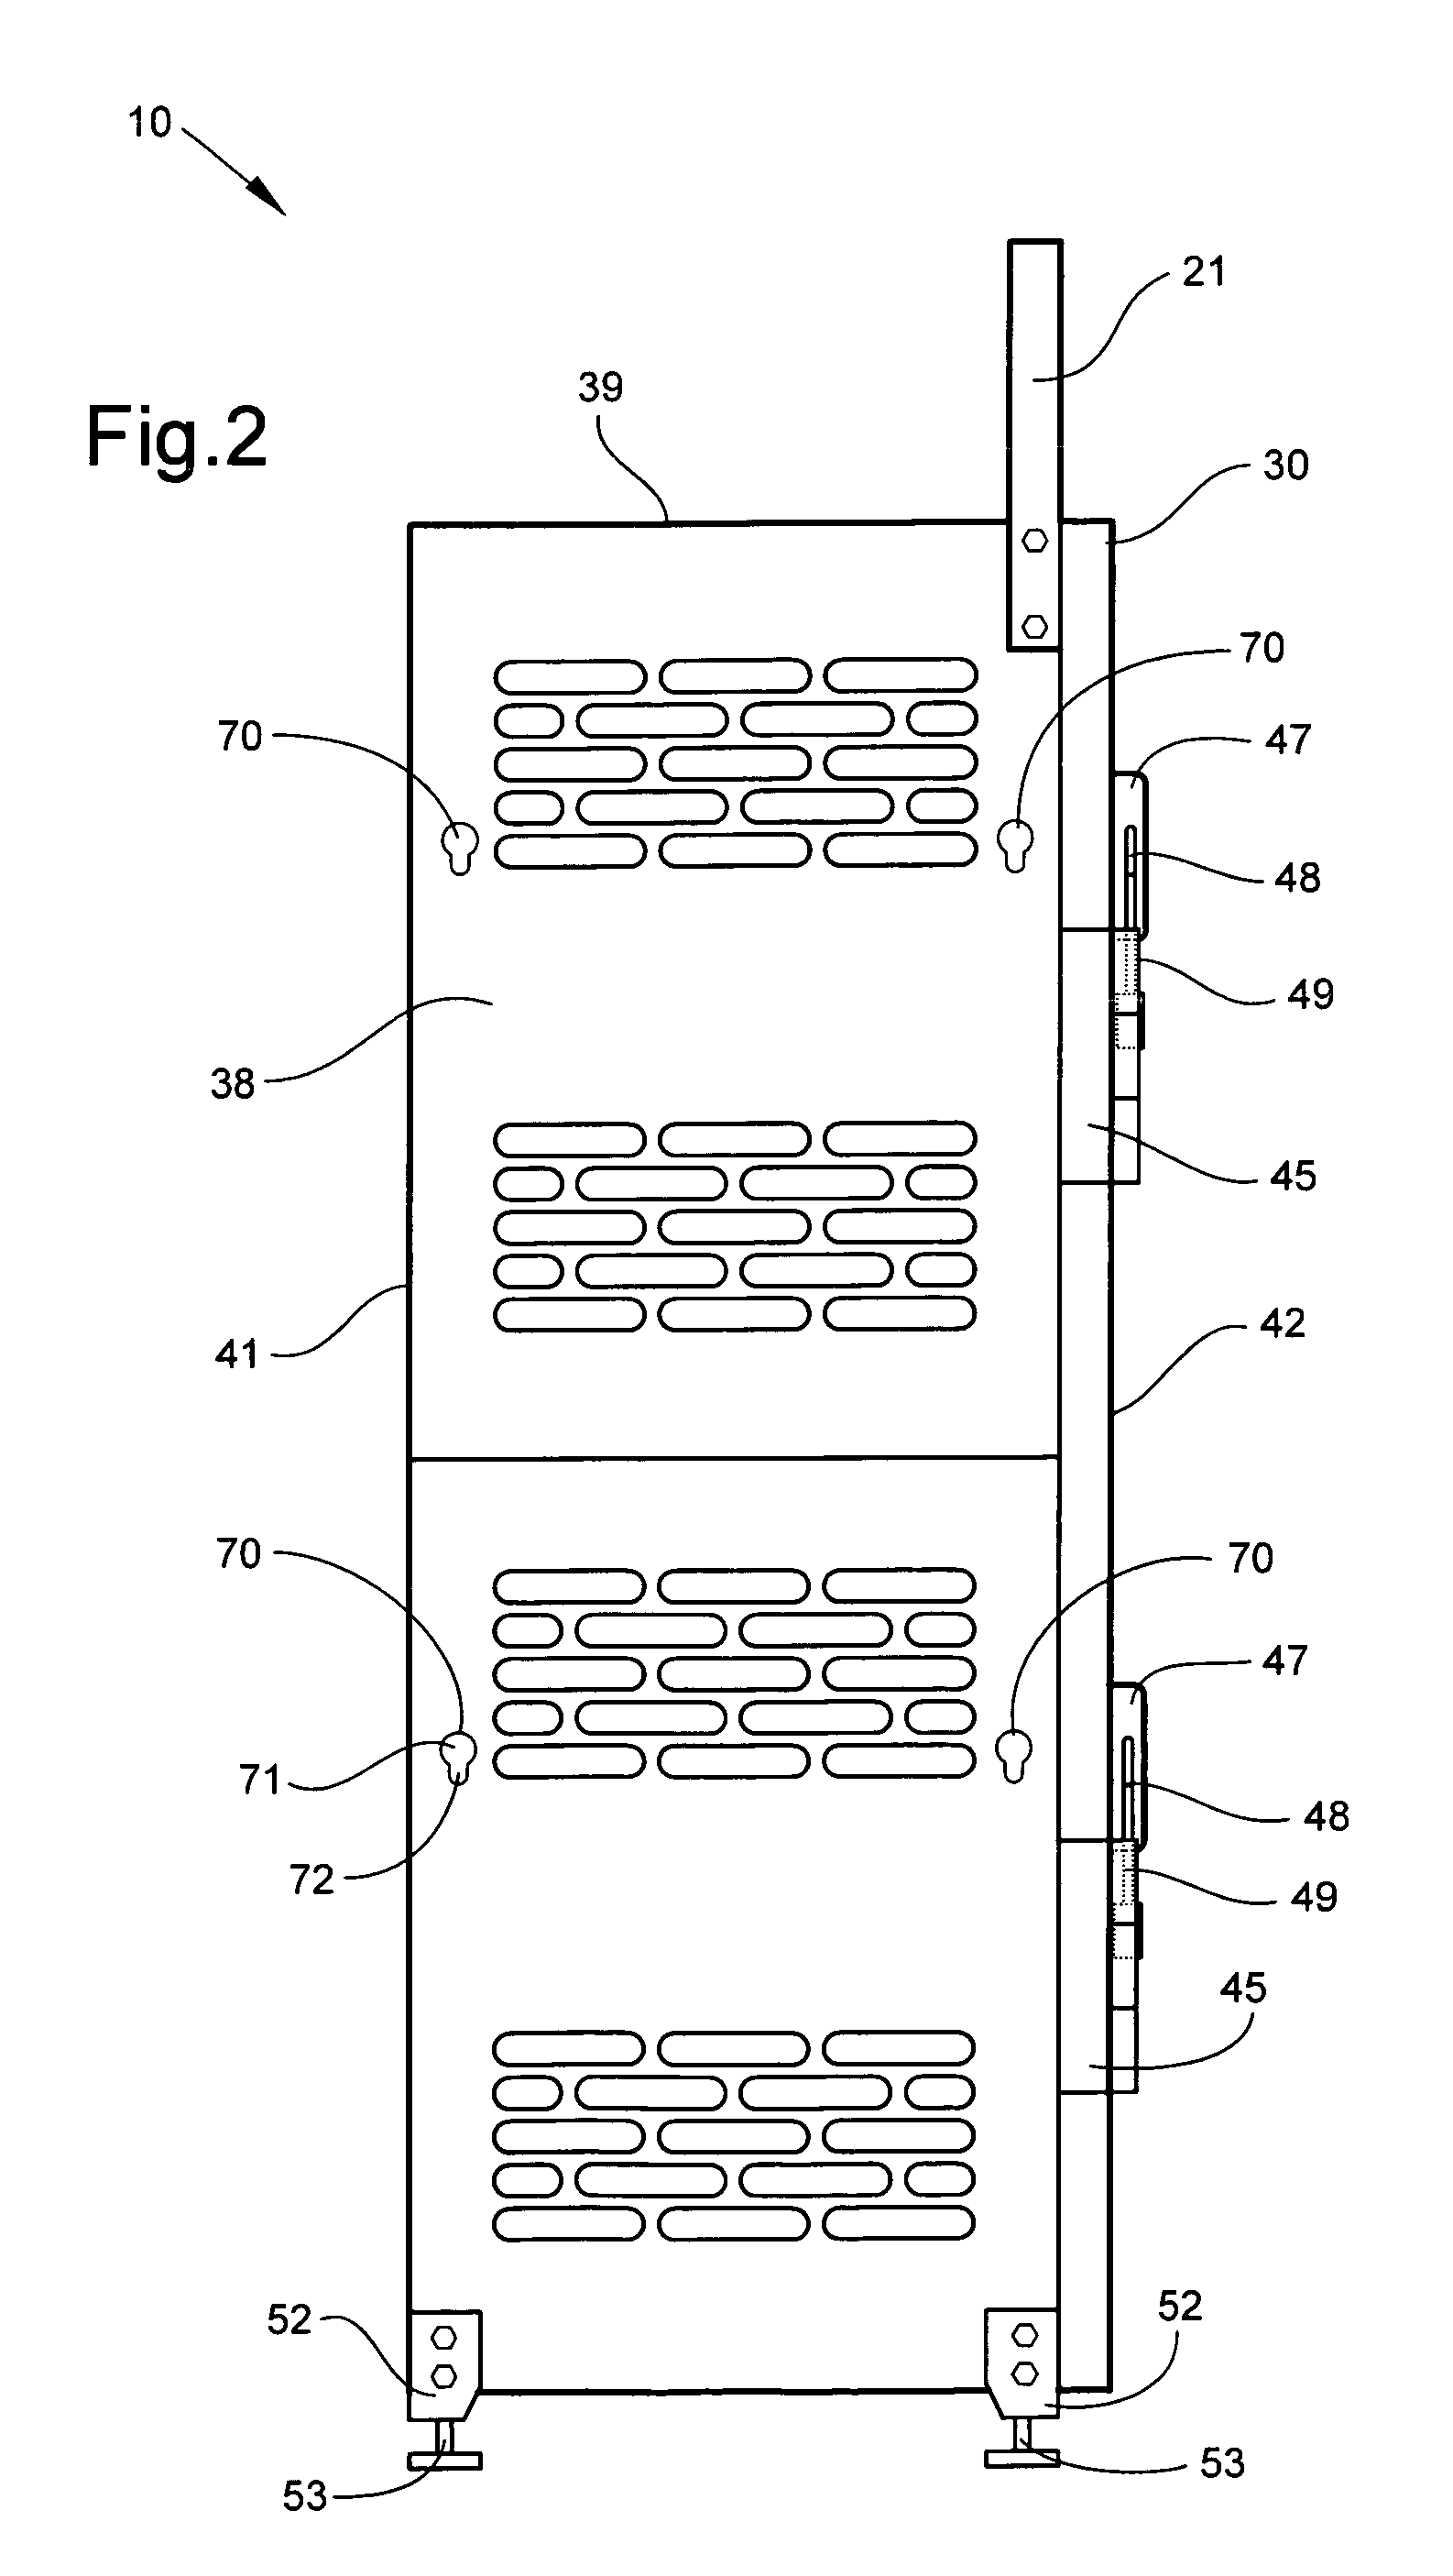 Consumer product dispensing system